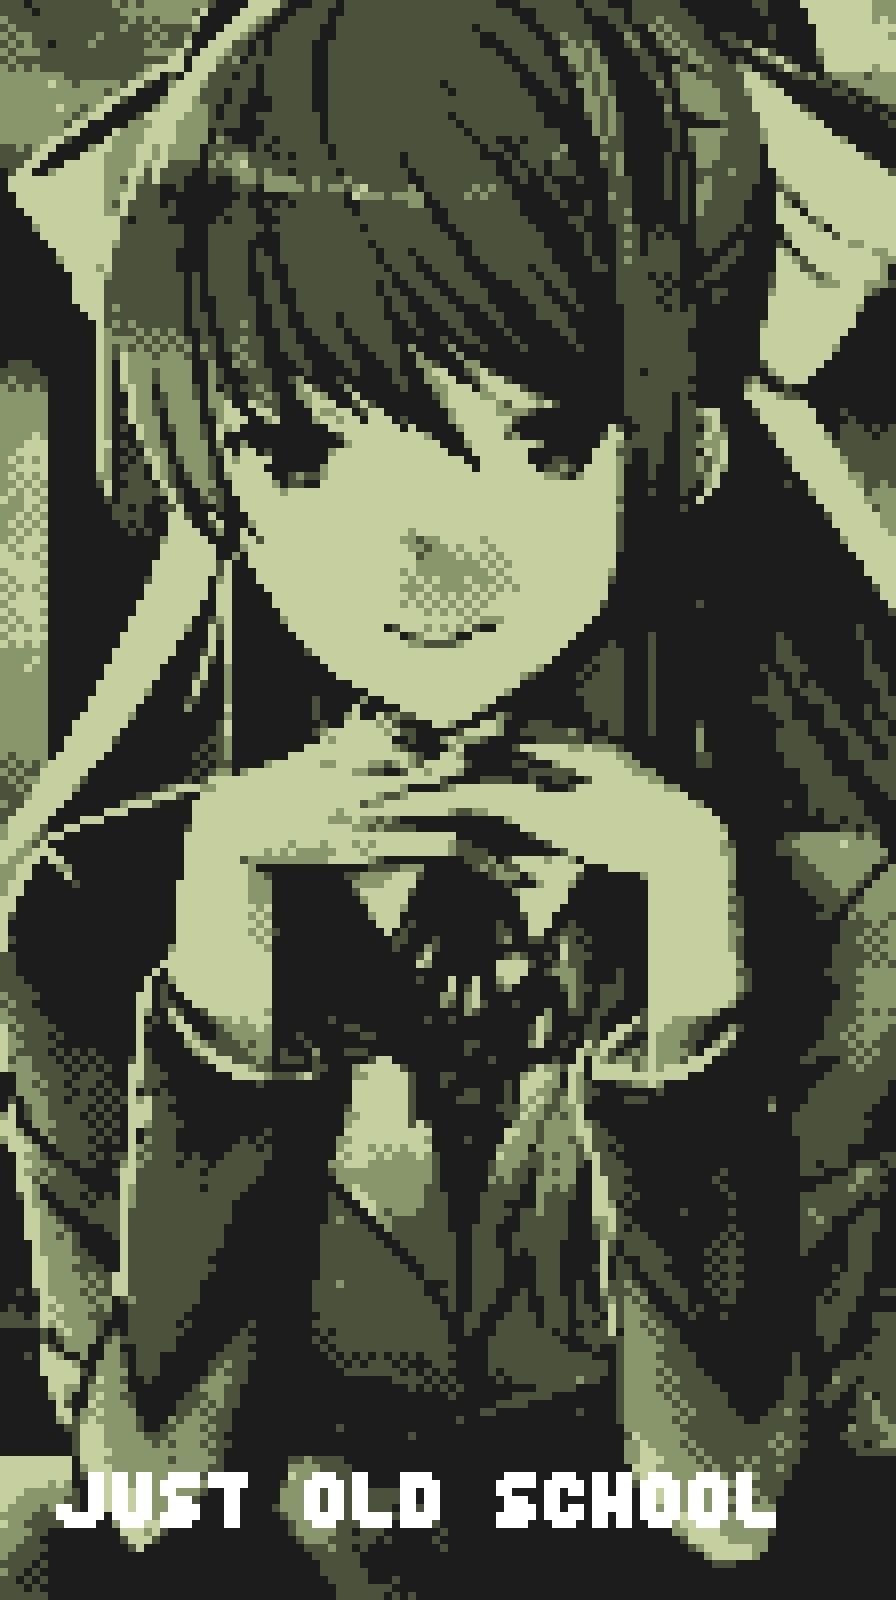 just old school phone wallpaper for the retro fans + ddlc fans